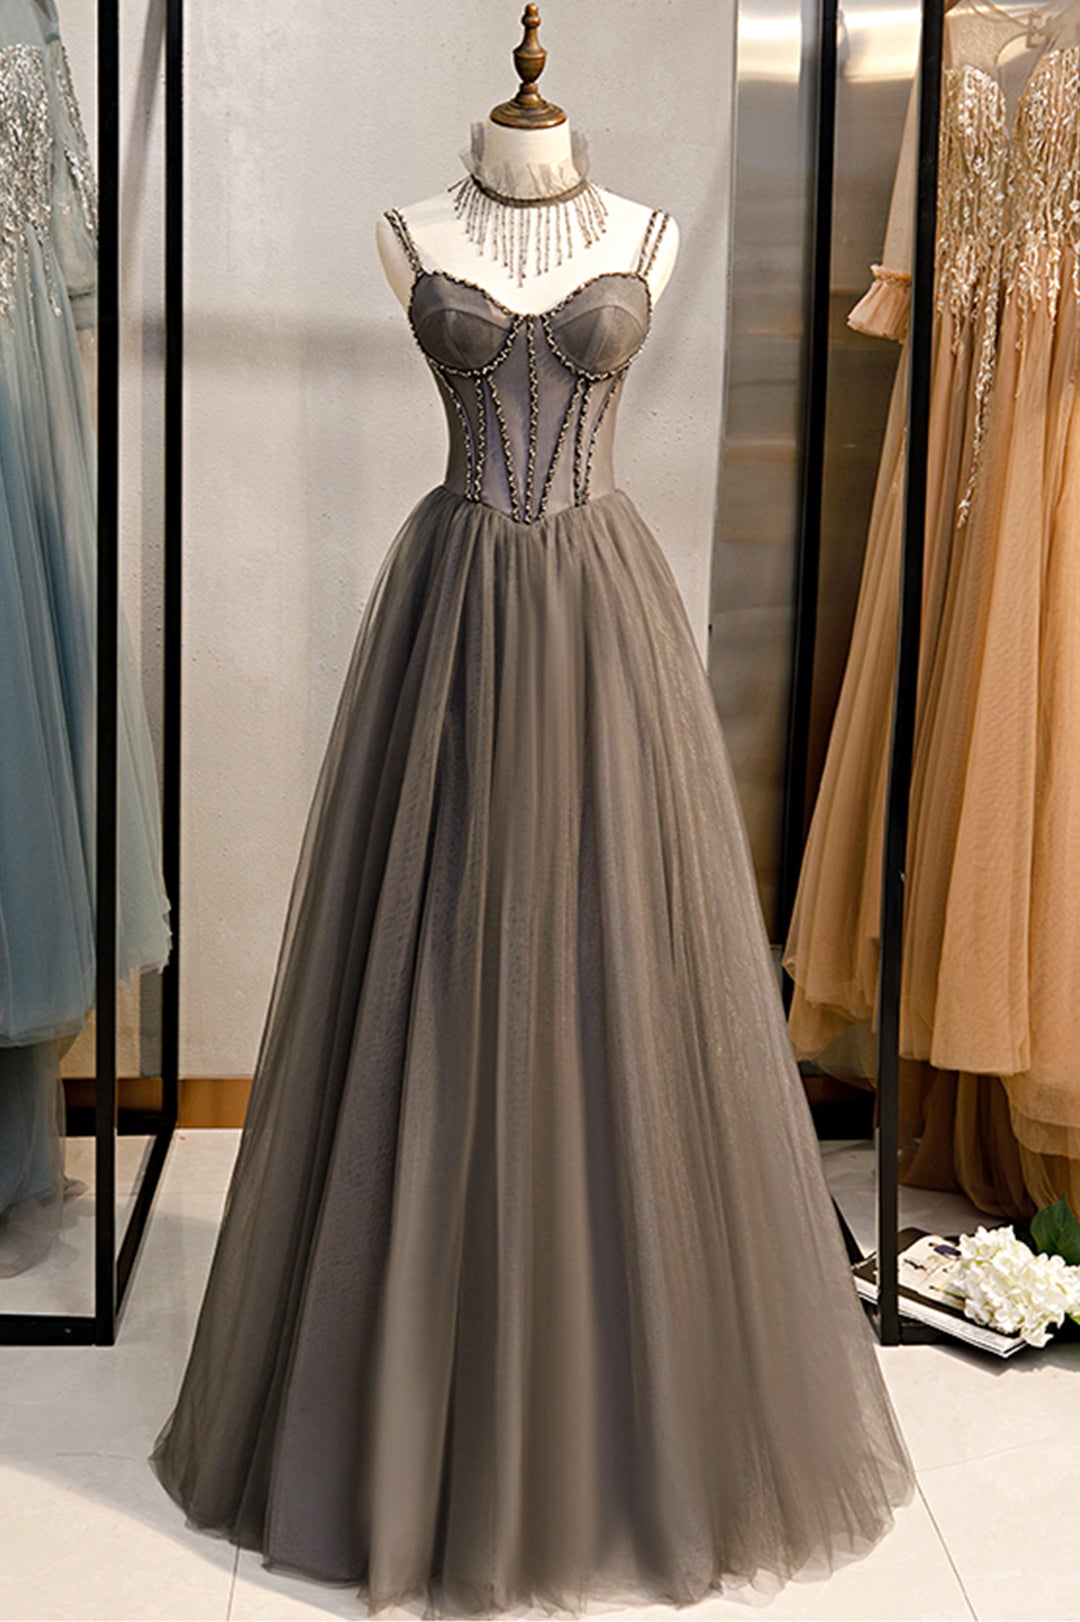 Bridesmaid Dress Styles, A-Line Tulle Long Prom Dress with Beading, Cute Evening Party Dress